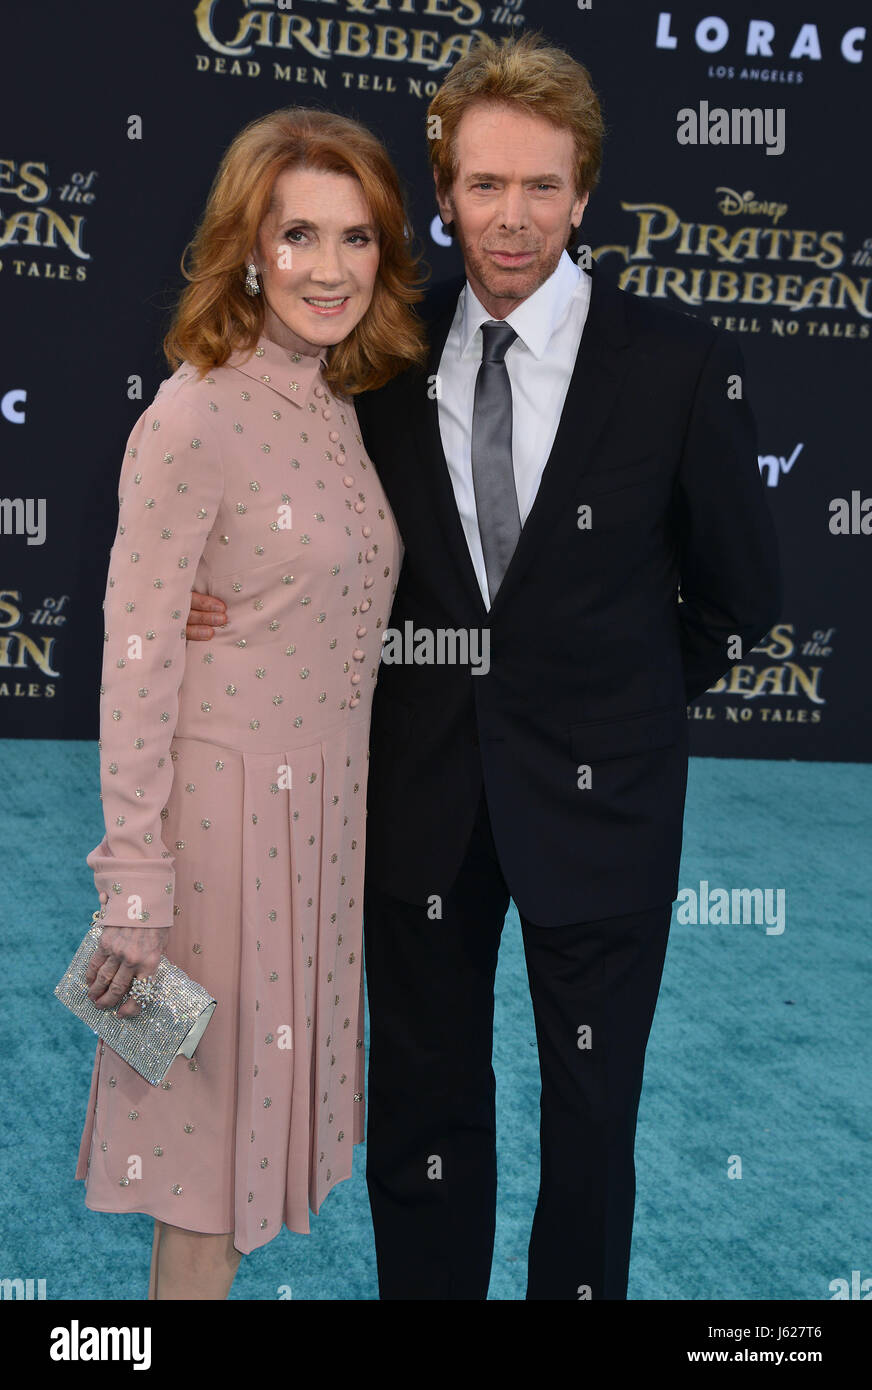 Los Angeles, USA. 18th May, 2017. Jerry Bruckheimer - producer and wife 064 arriving at The Pirates Of The Caribbean- Dead Men Tell No Tales Premiere at the Dolby Theatre in Los Angeles. May 18, 2017. Credit: Tsuni / USA/Alamy Live News Stock Photo